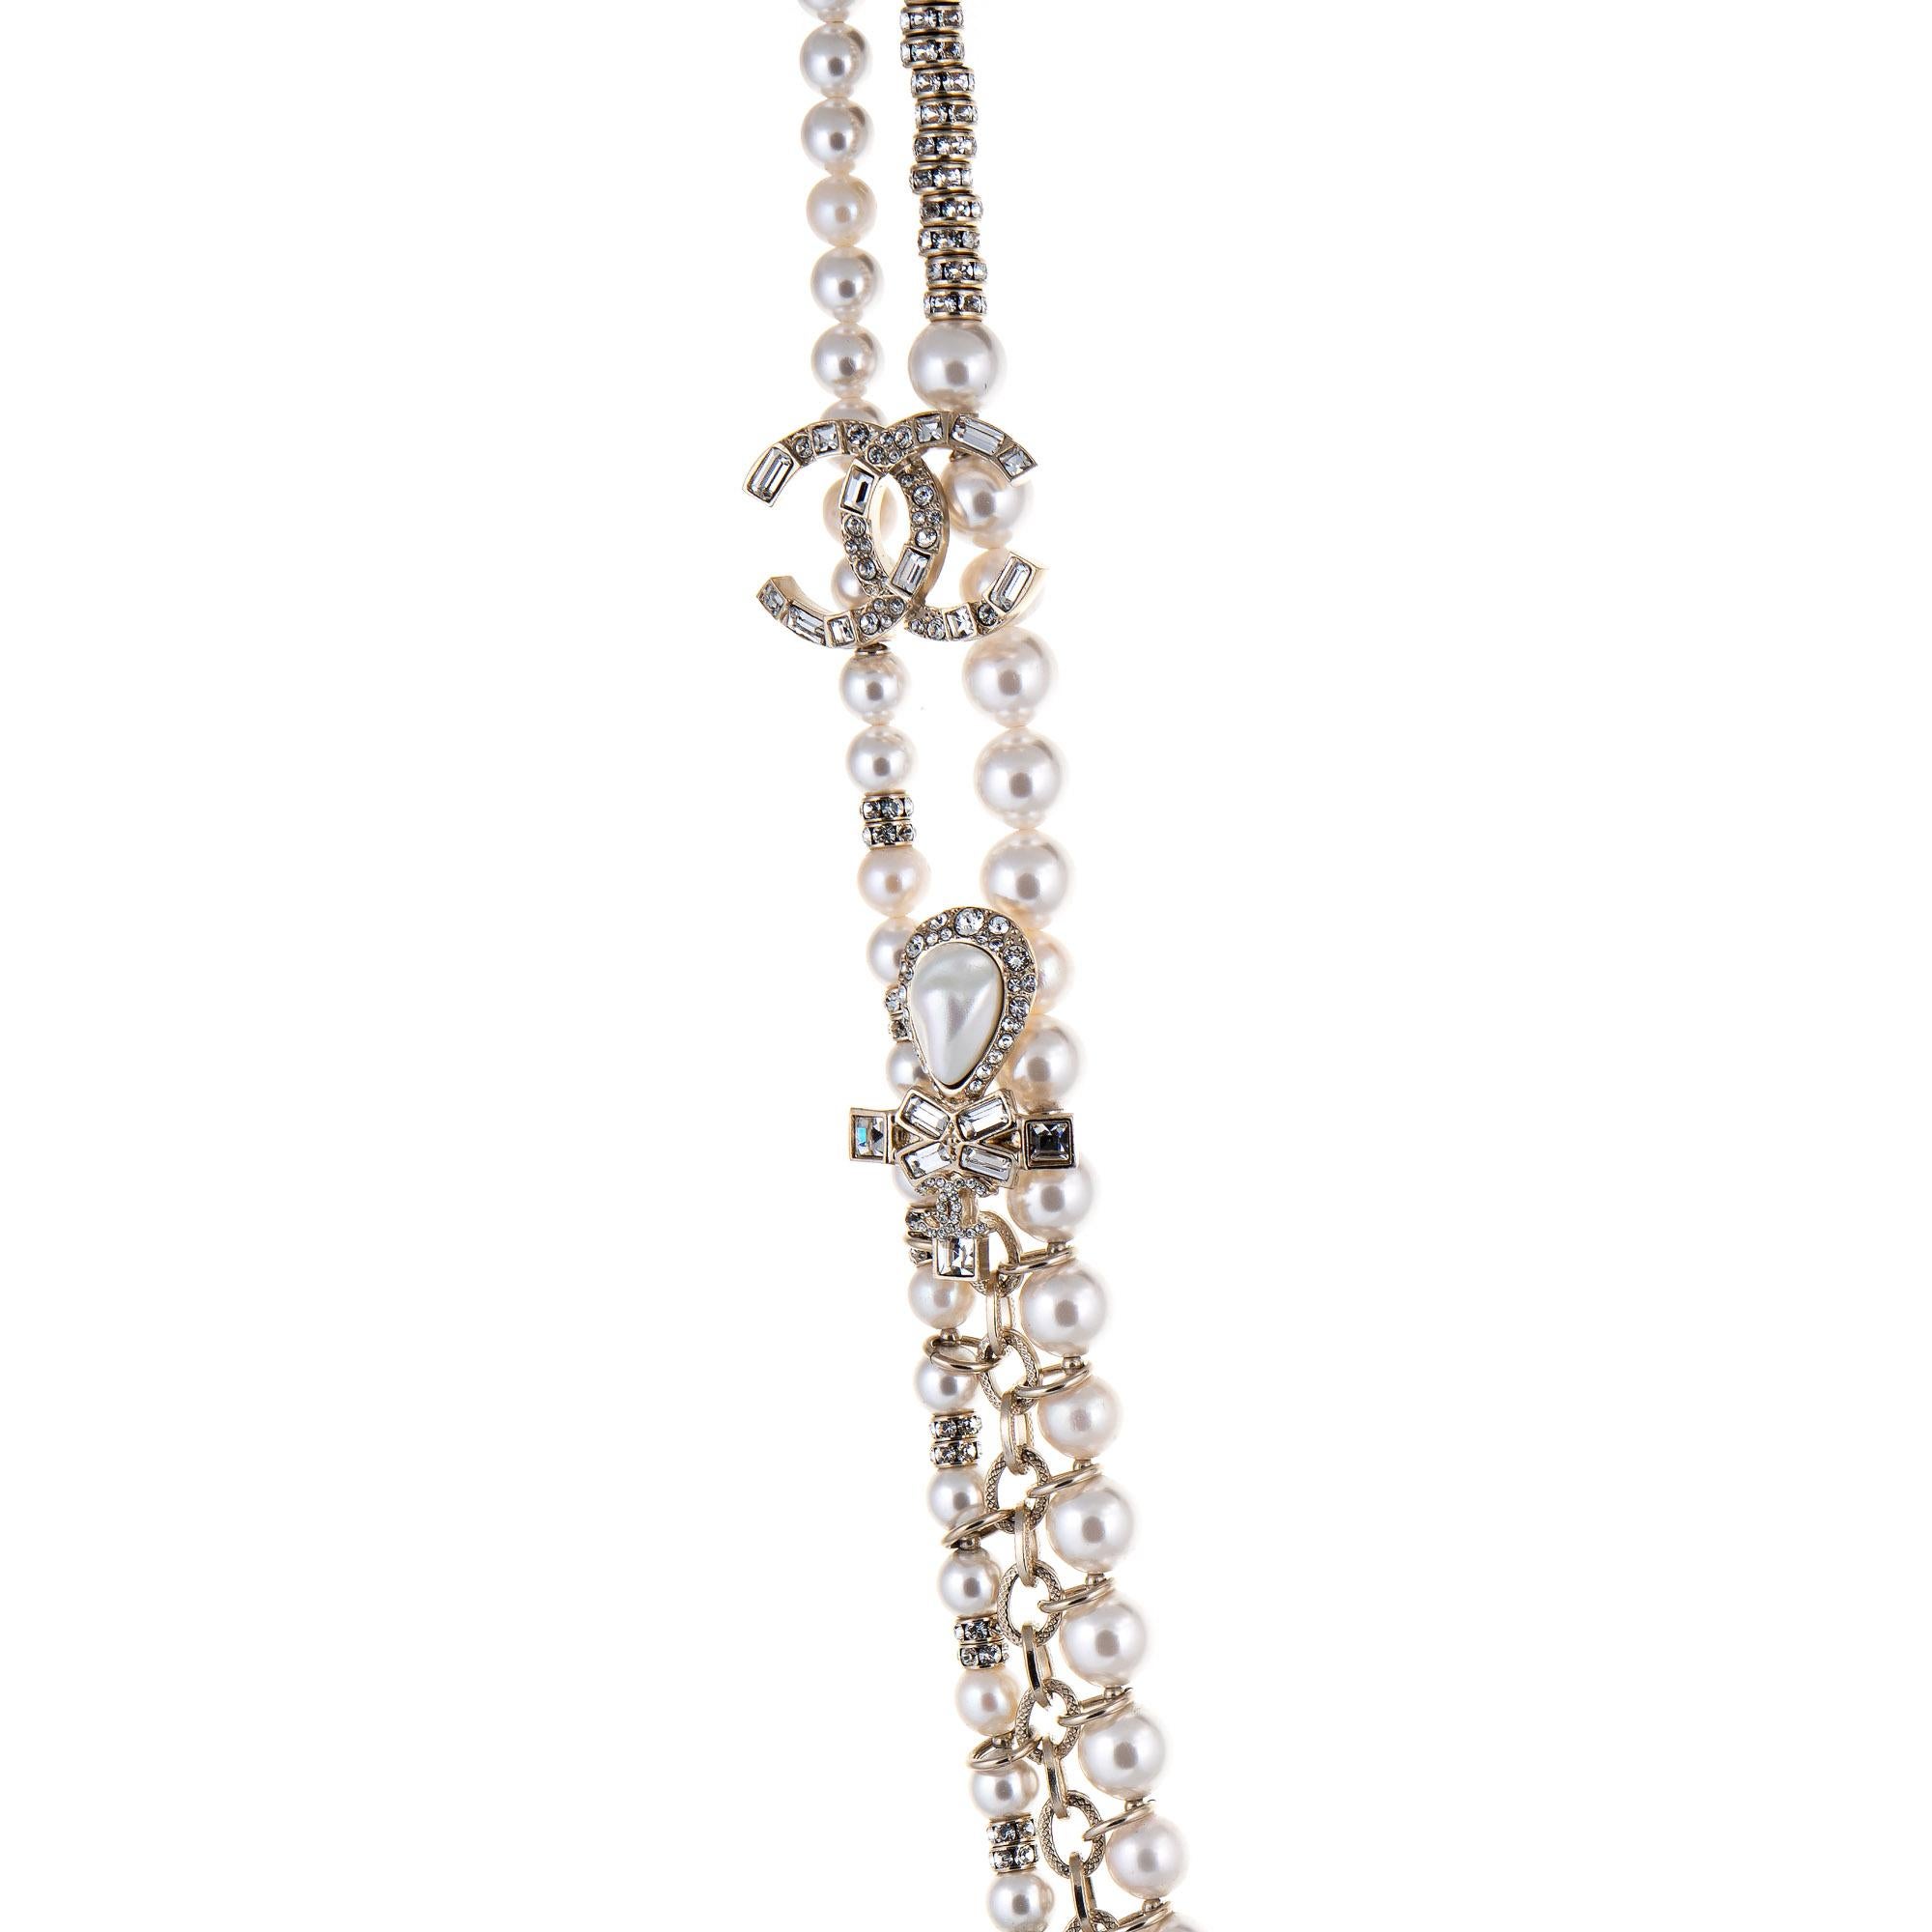 Pre-owned Chanel crystal graduated faux pearl necklace (or belt) crafted in light yellow gold-tone (circa 2019). 

The necklace features graduated 6mm to 8mm faux white pearls, separated with crystal-embellished stations. Two CC logos and four cross